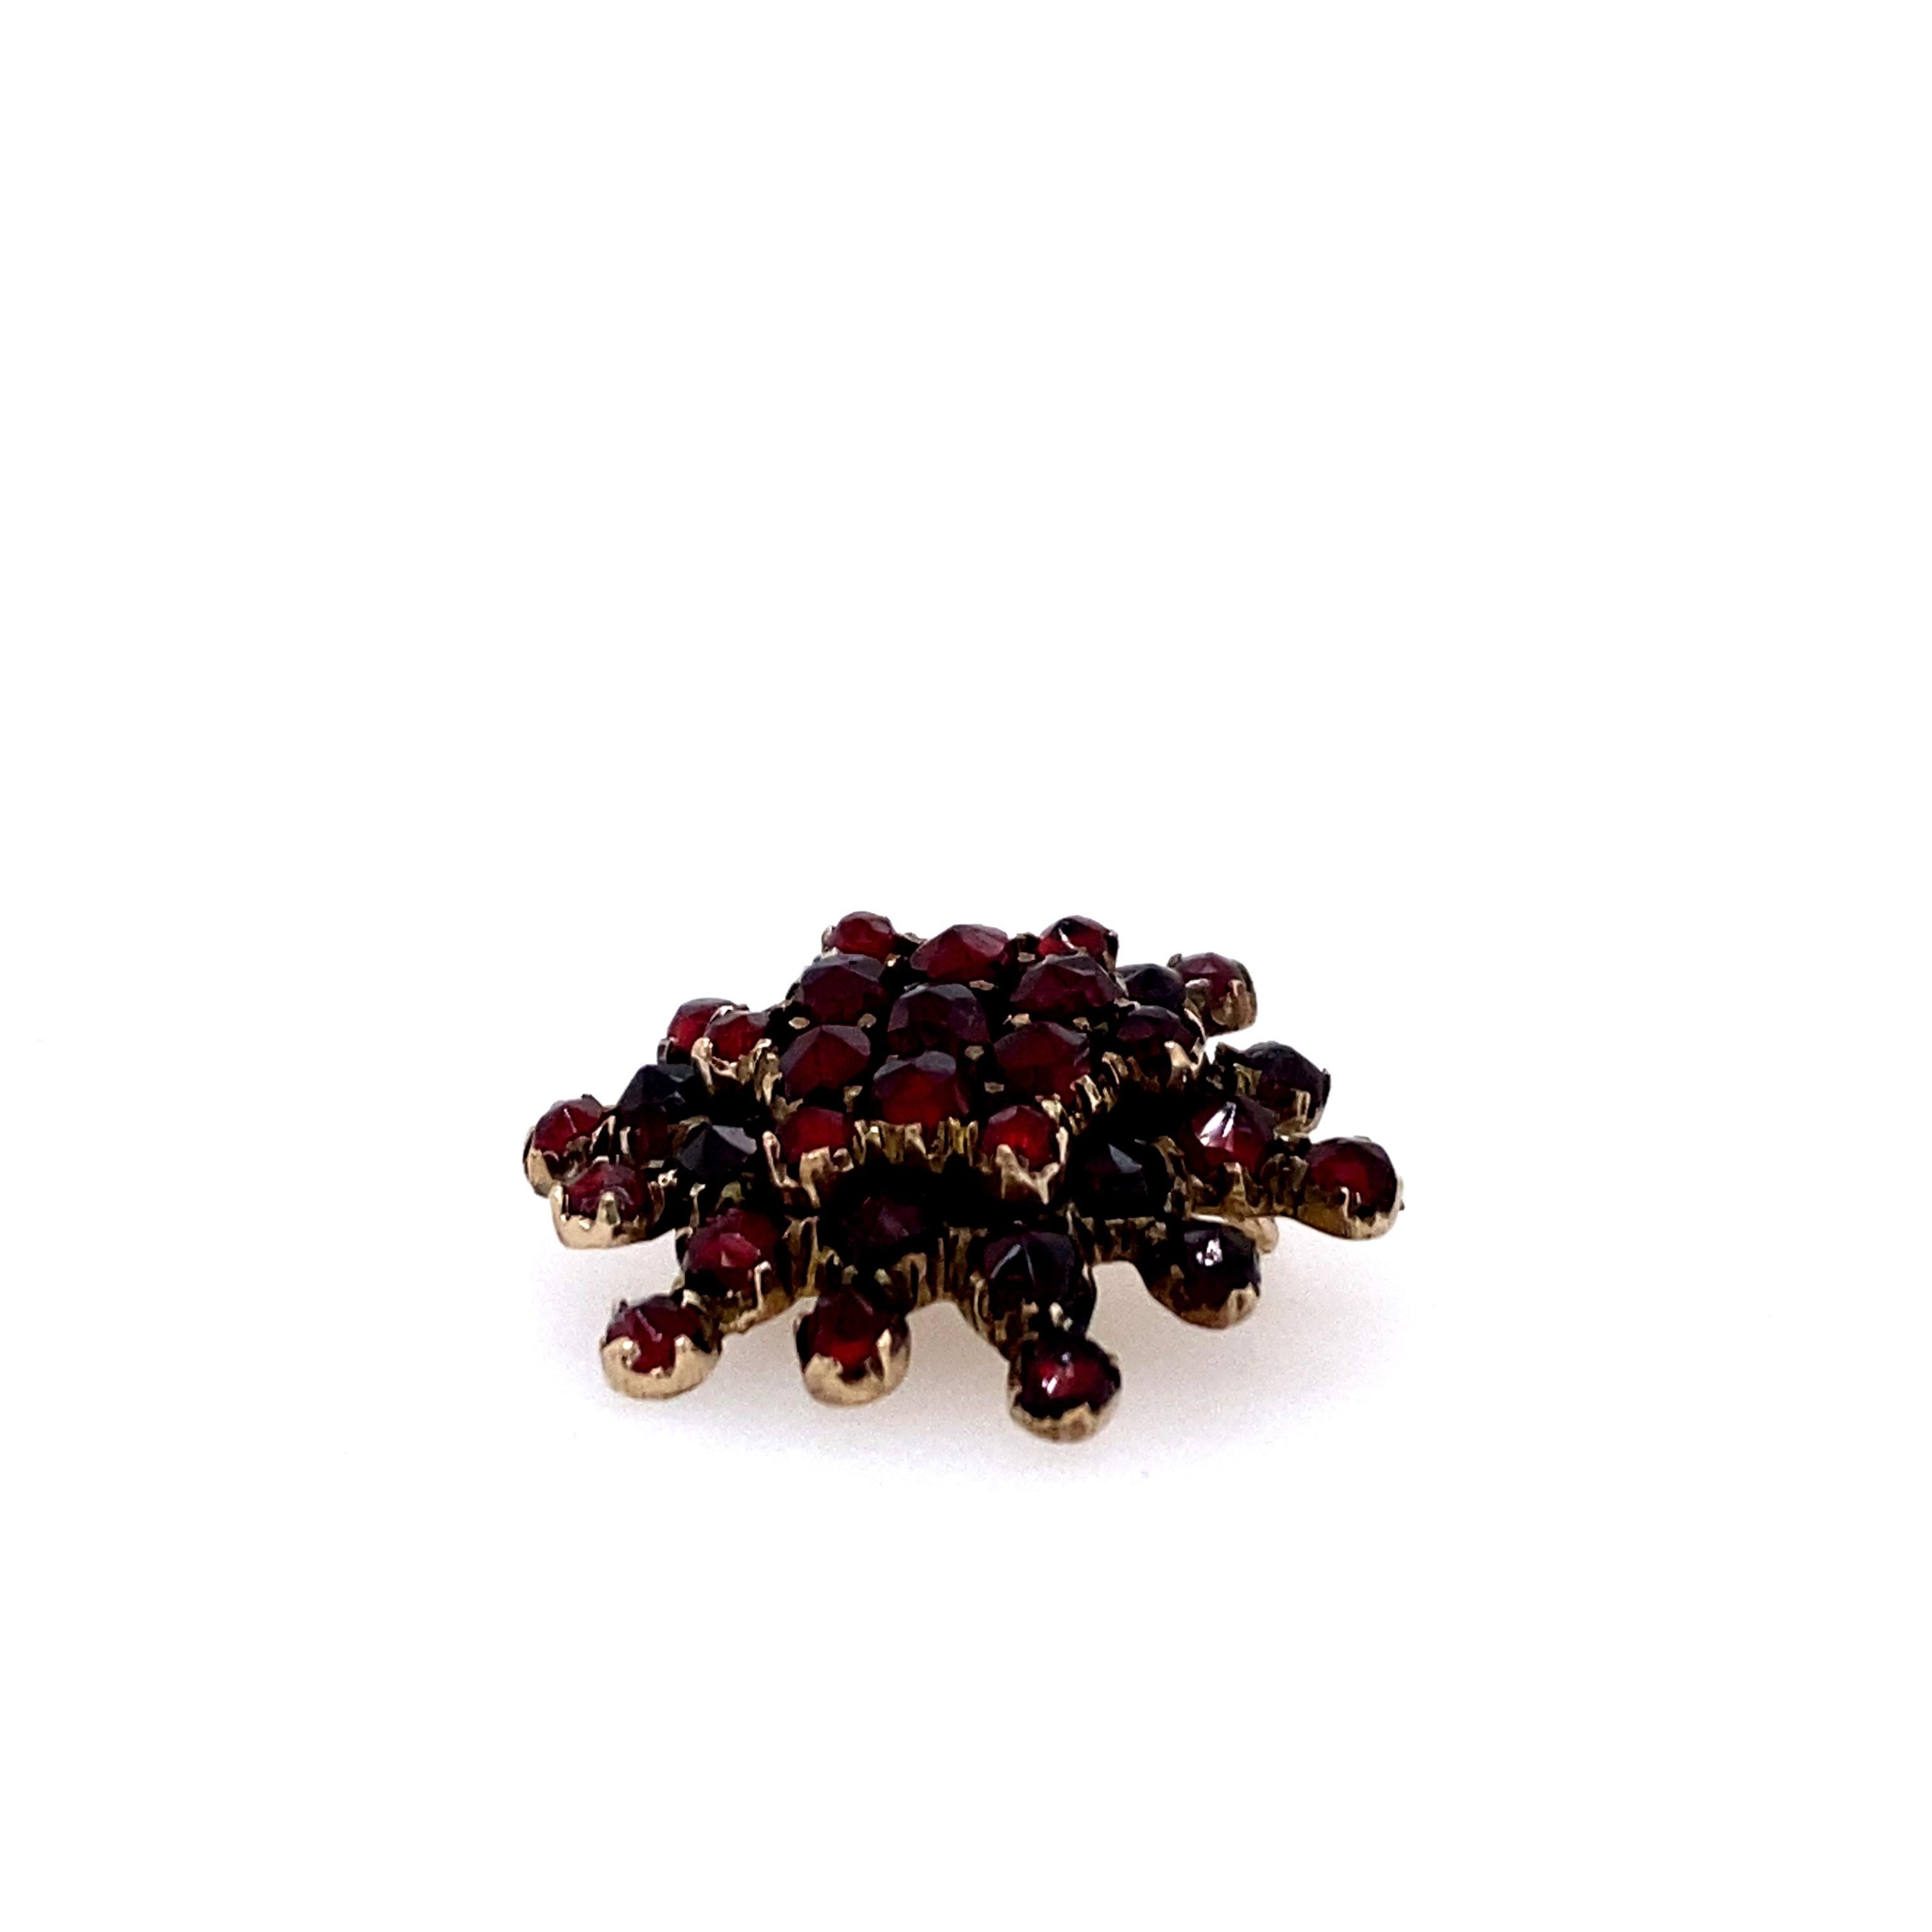 One sterling silver gold filled garnet cluster pin set with twenty-seven round garnets in a starburst setting complete with a traditional pin clasp.  Circa 1910.